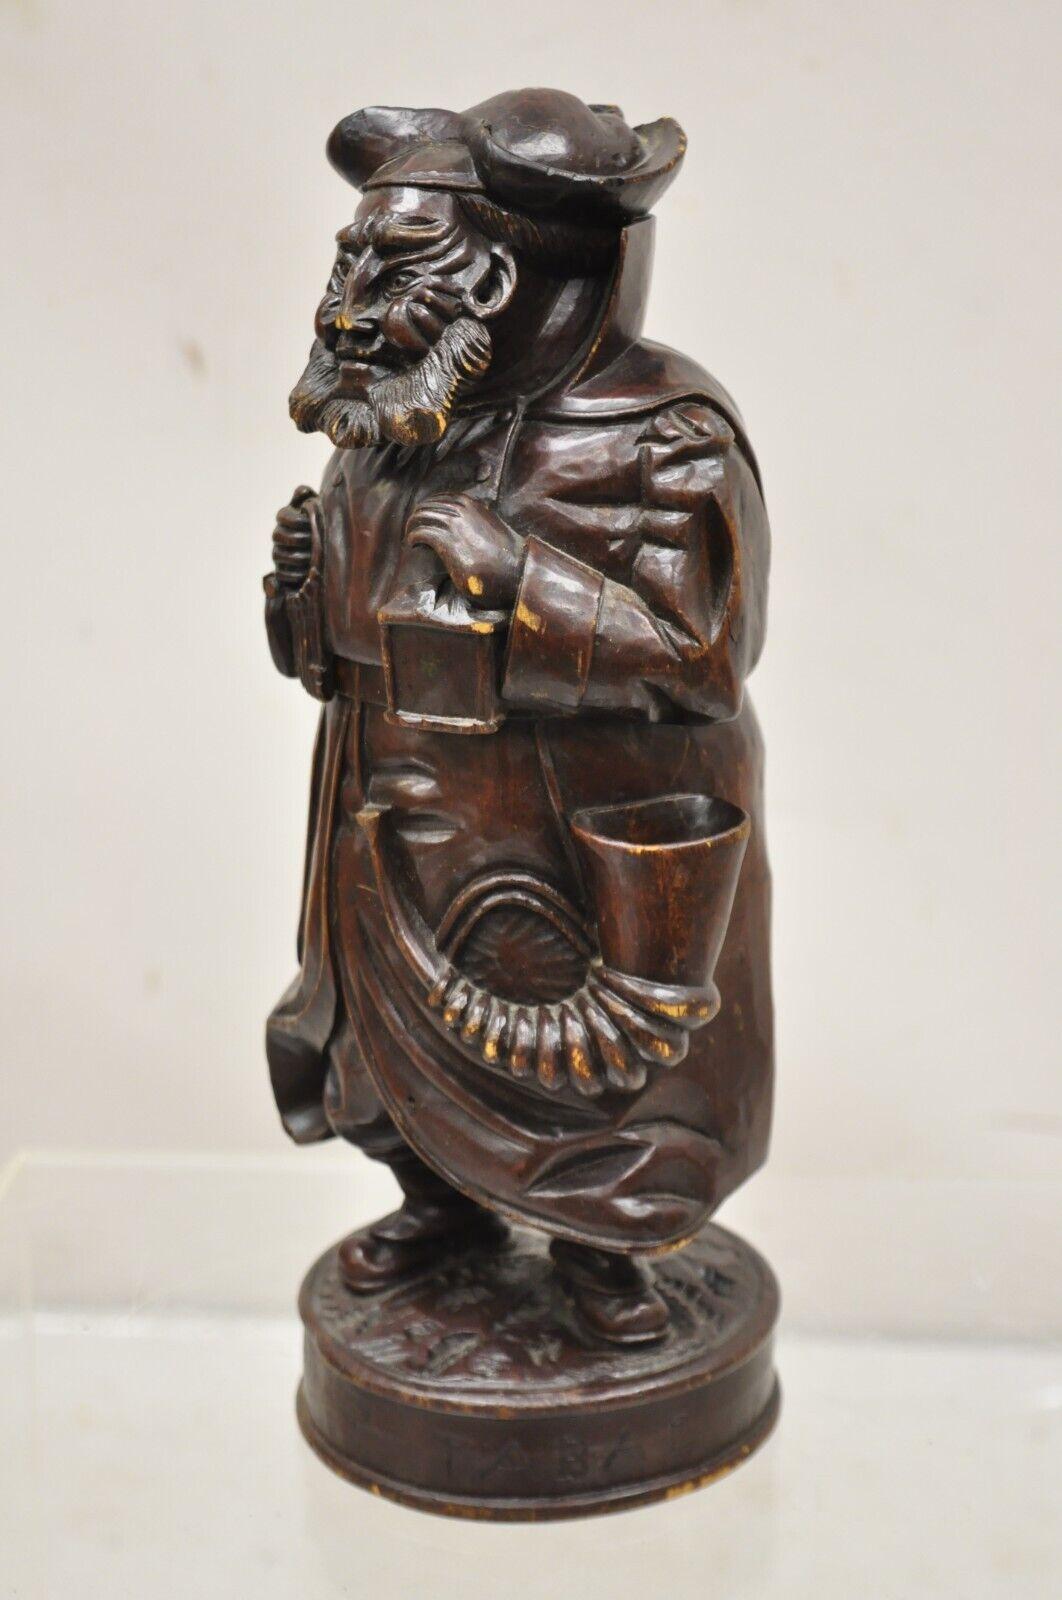 Antique 19th C. European Black Forest Figural Wood Carved Night Watchman Lidded Tobacco Jar Box with Removable Tin Metal. Liner. Believed to be 19th Century. Measurements: 14